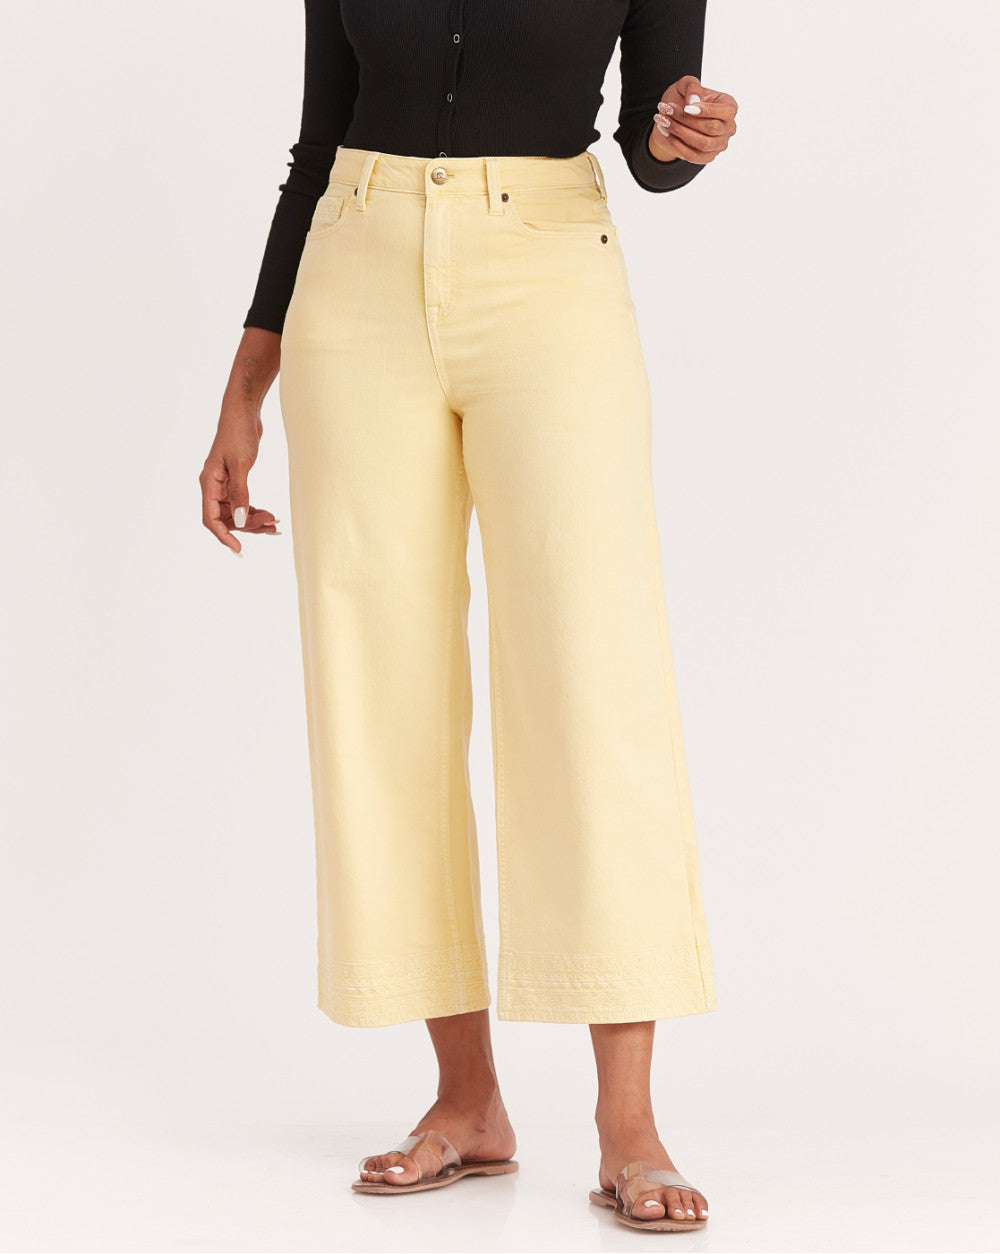 Wide Leg High Waist Boho Embroidered Colored Jeans - Daffodil Yellow